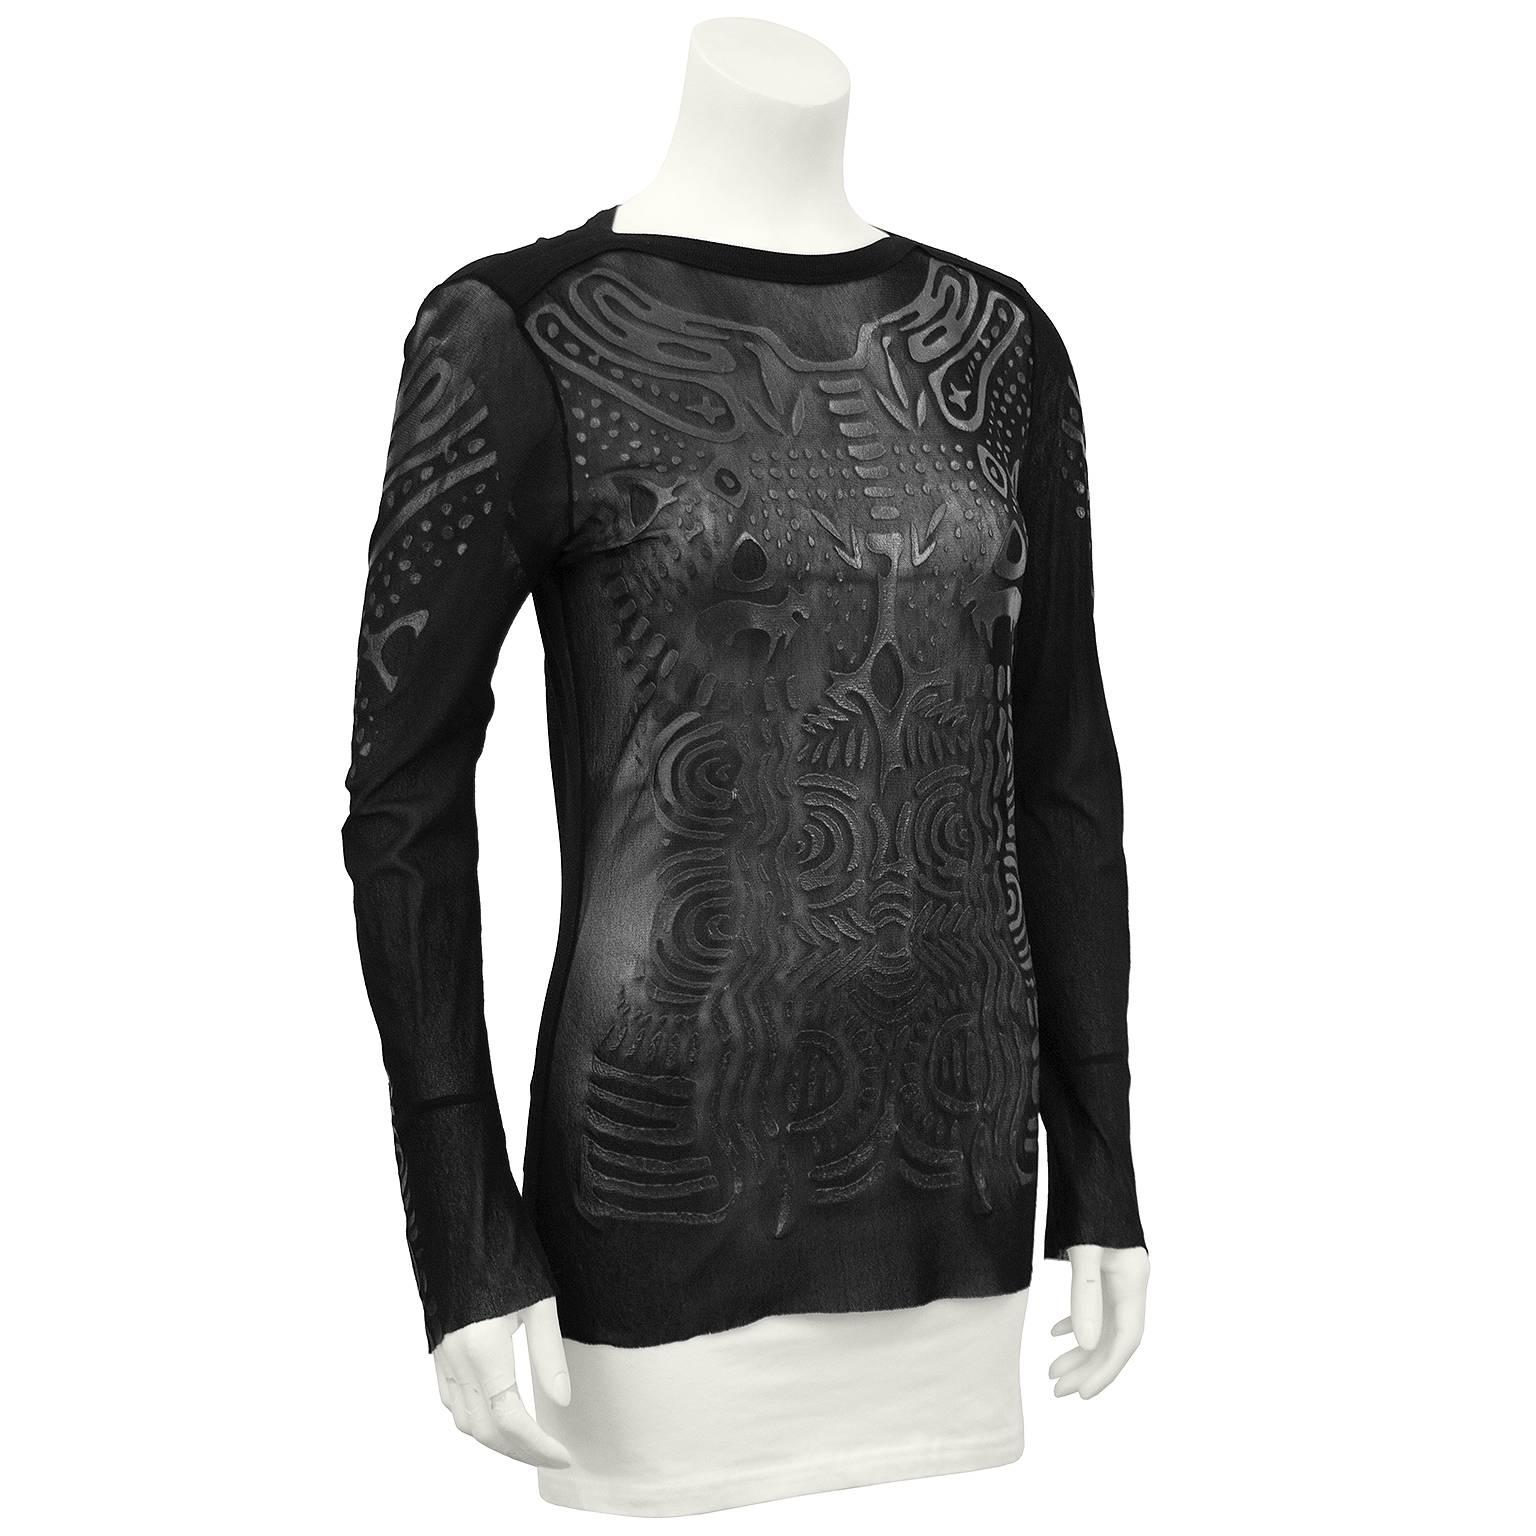 1990s Jean Paul Gaultier black sheer long sleeve top. Sheer with monochromatic black screen printed abstract shapes that resemble tattoos when wearing. Excellent vintage condition. Fits like a US 4. 


Sleeve 21" Shoulder 18" Bust 35"